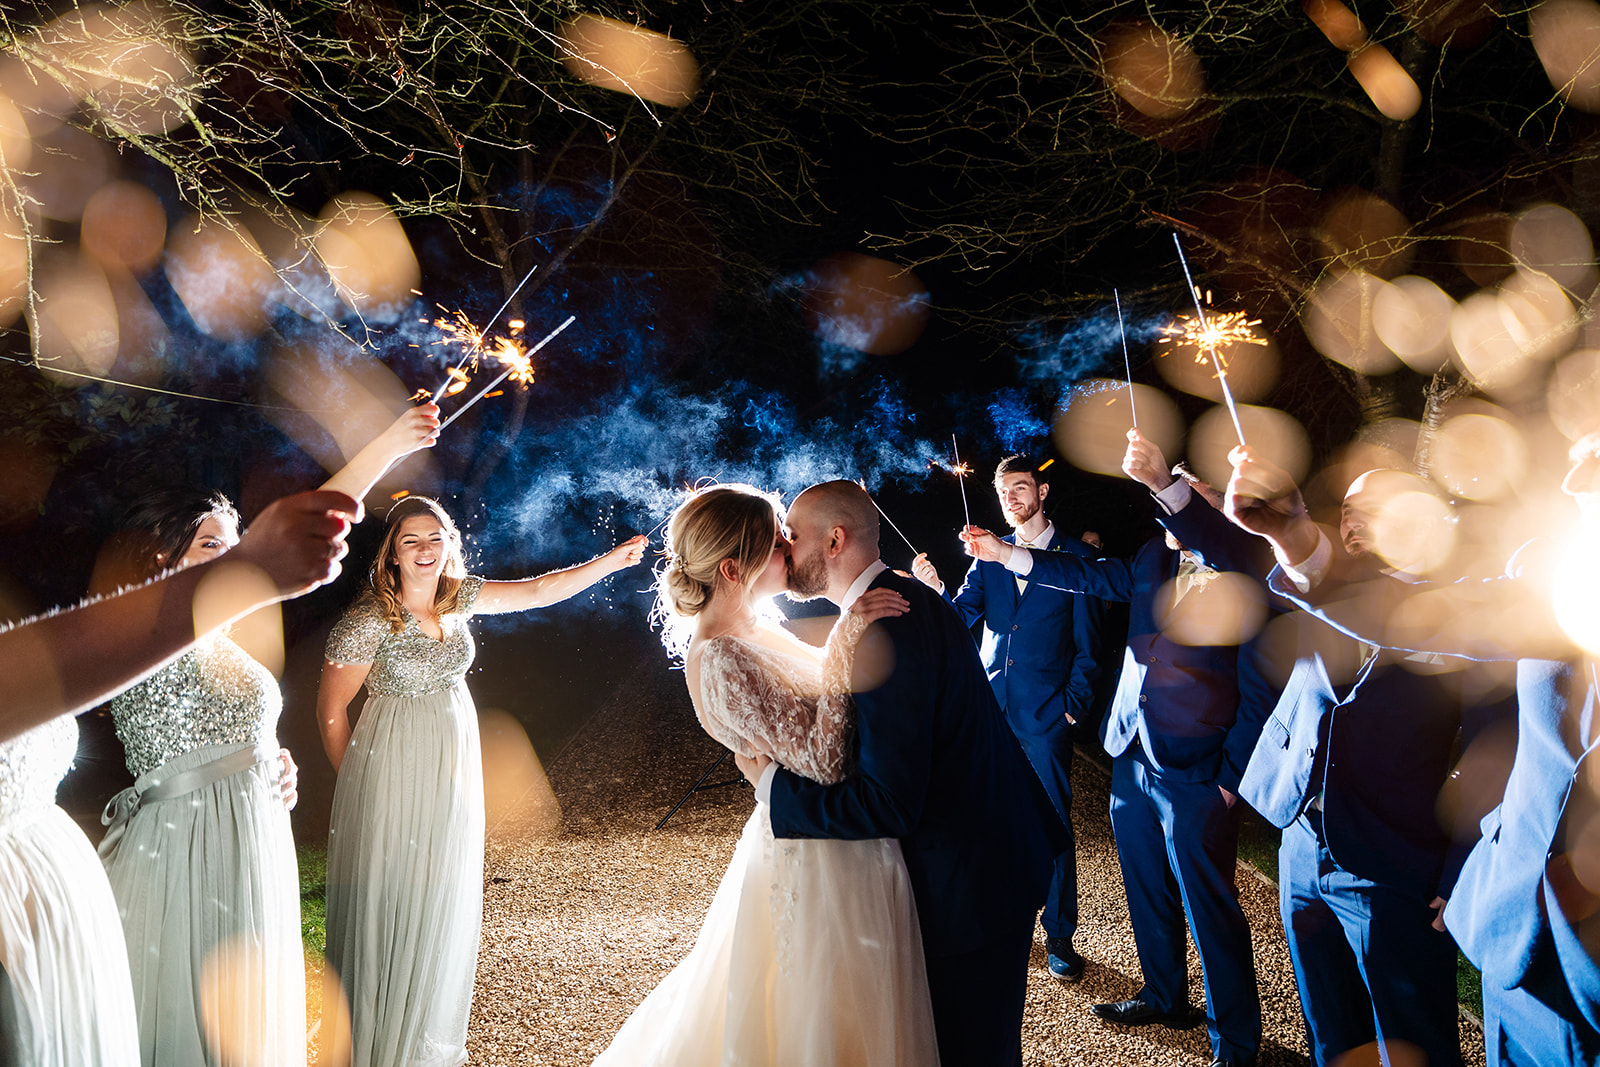 Couple share a kiss in sparkler archway made by bridesmaids and groomsmen